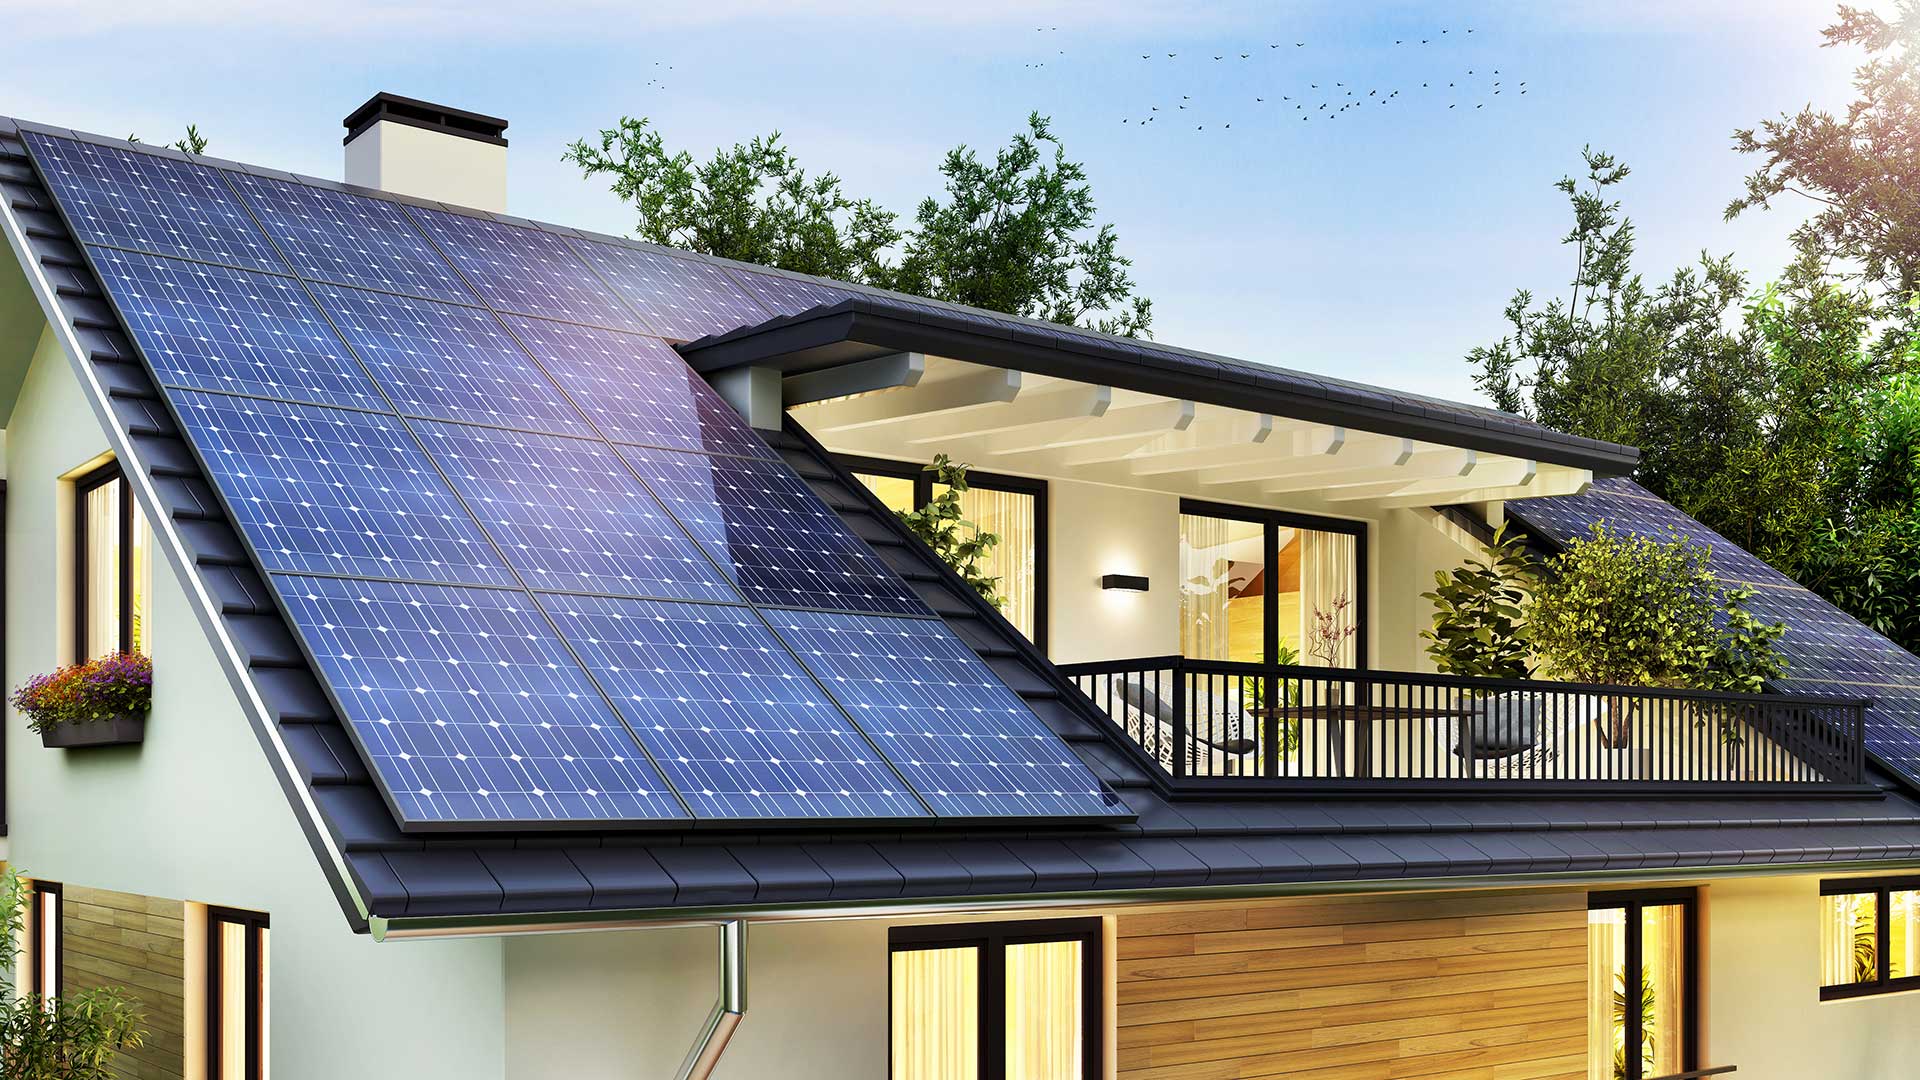 Interested in Free Solar Panels? Read the Fine Print